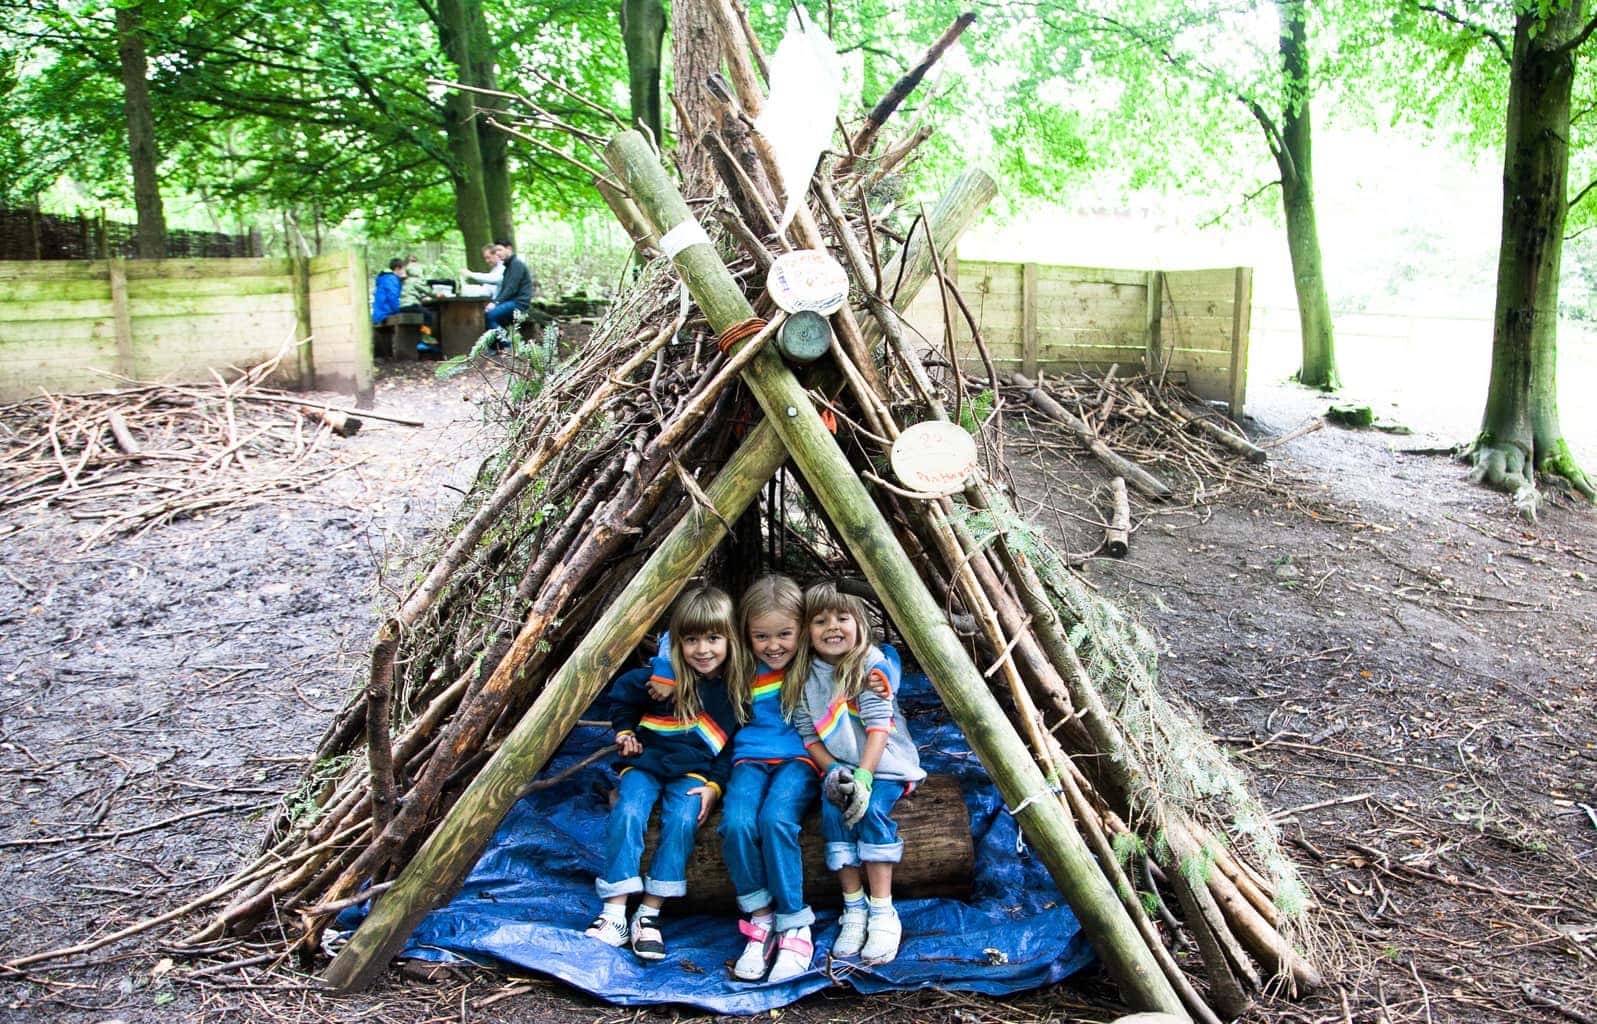 Family Den Building and Decorating at Center Parcs www.minitravellers.co.uk